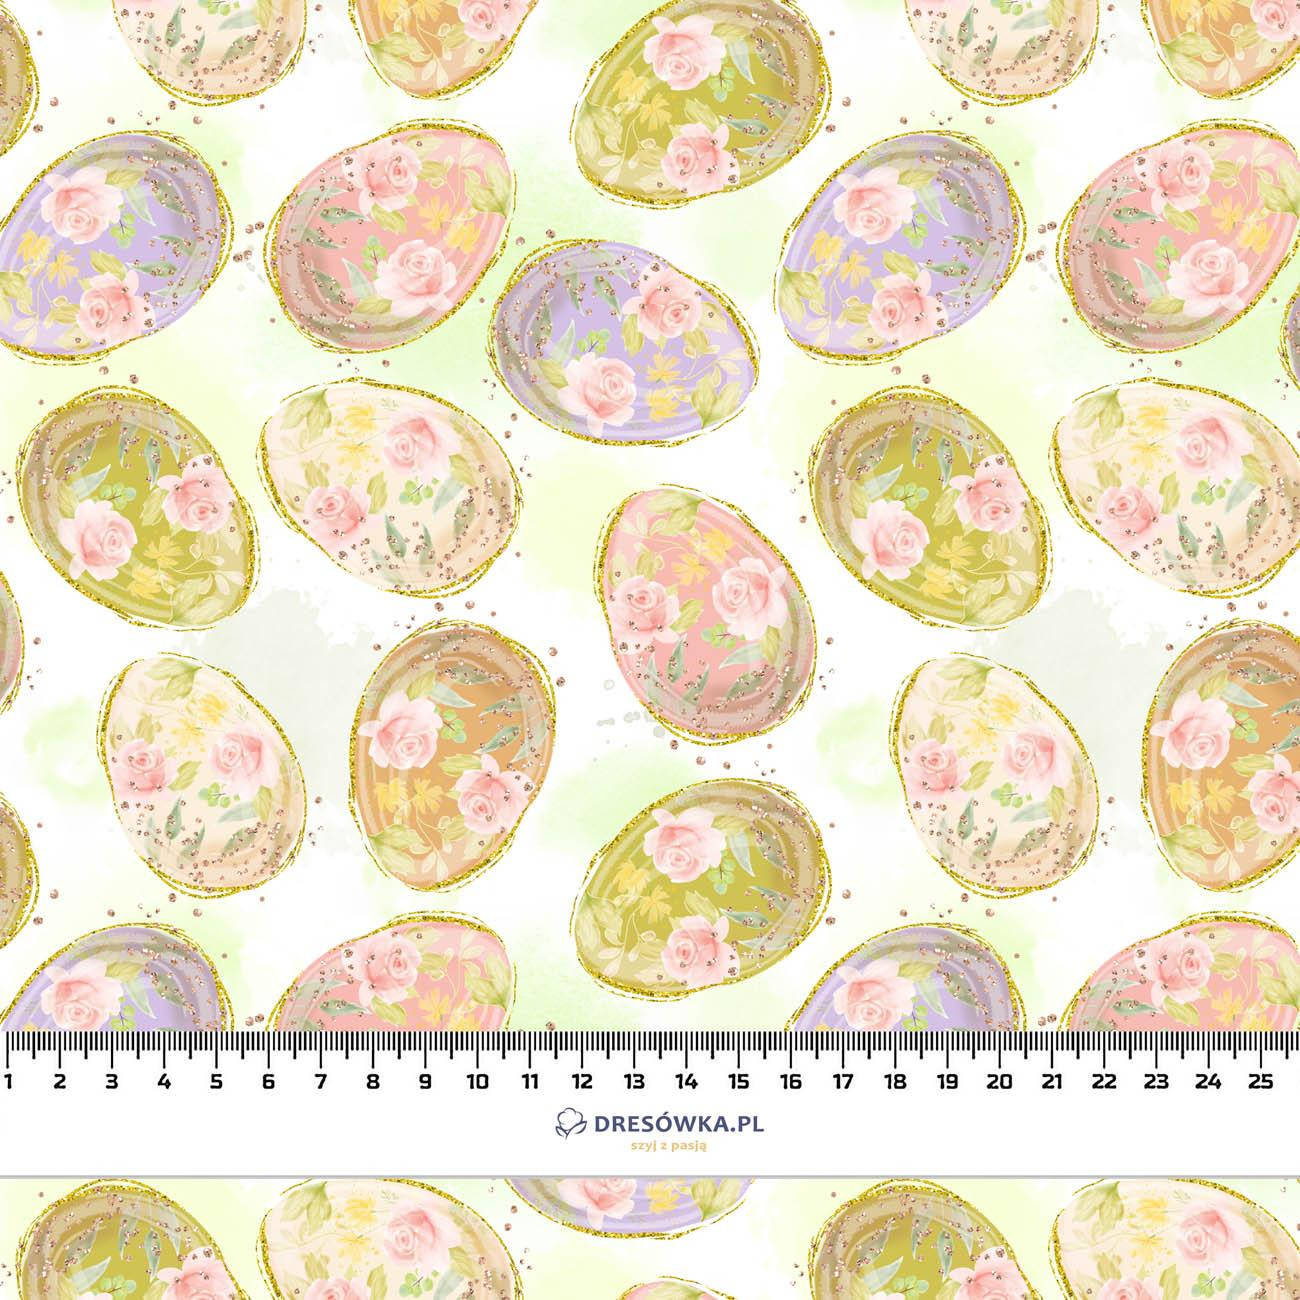 EASTER EGGS PAT. 1 (CUTE BUNNIES) - Woven Fabric for tablecloths